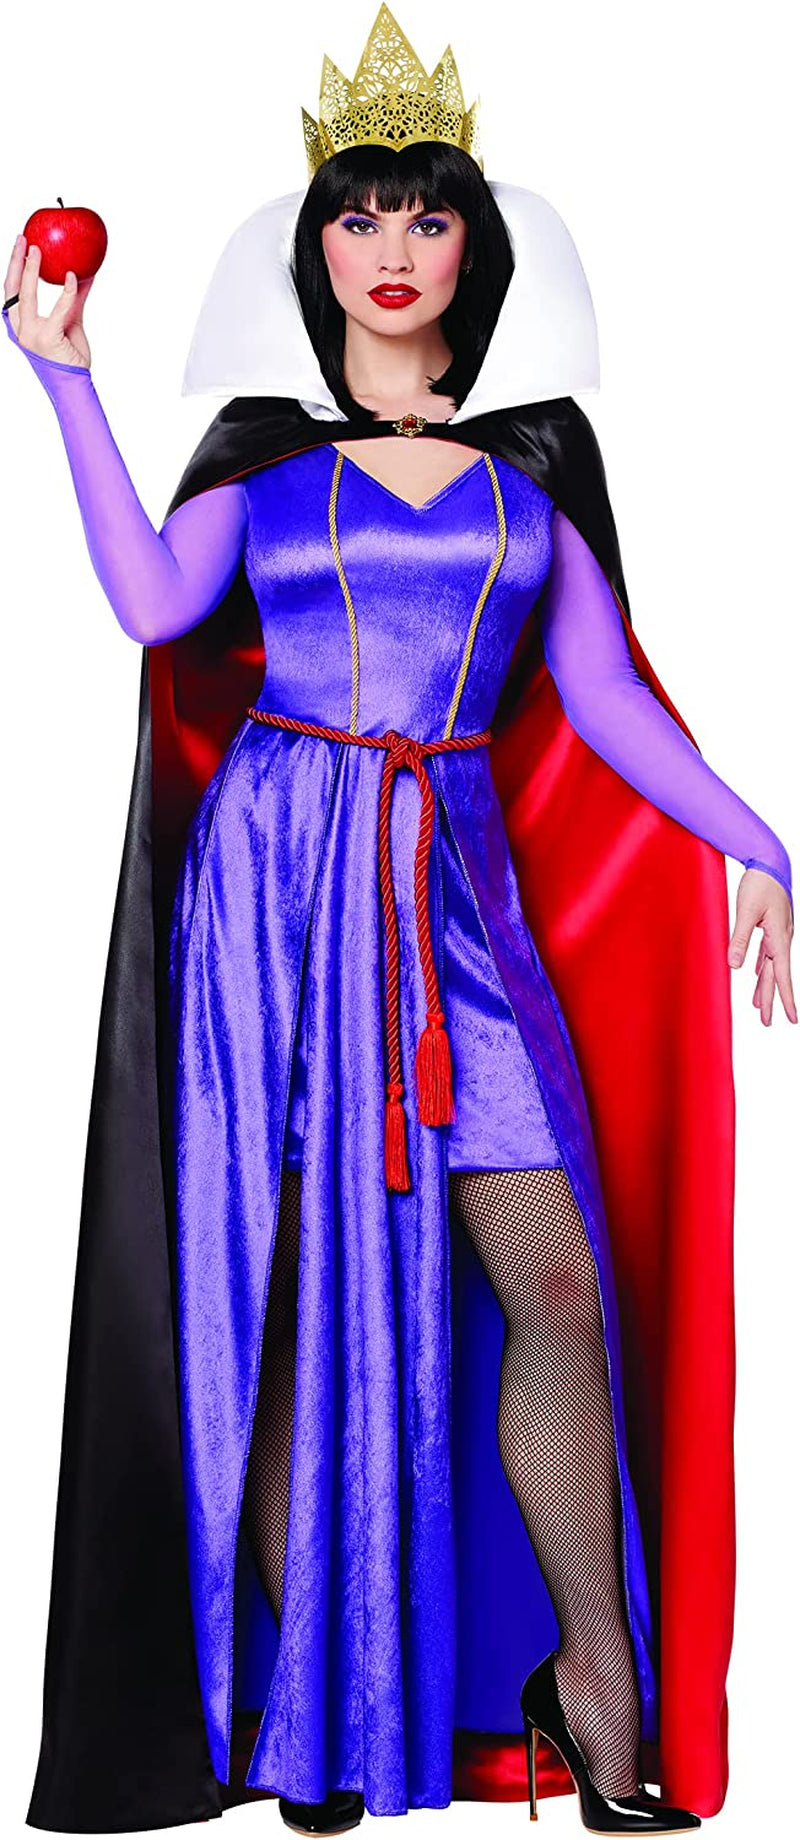 Spirit Halloween Snow White Adult Evil Queen Costume – Disney Villains | Officially Licensed | TV and Movie Costumes